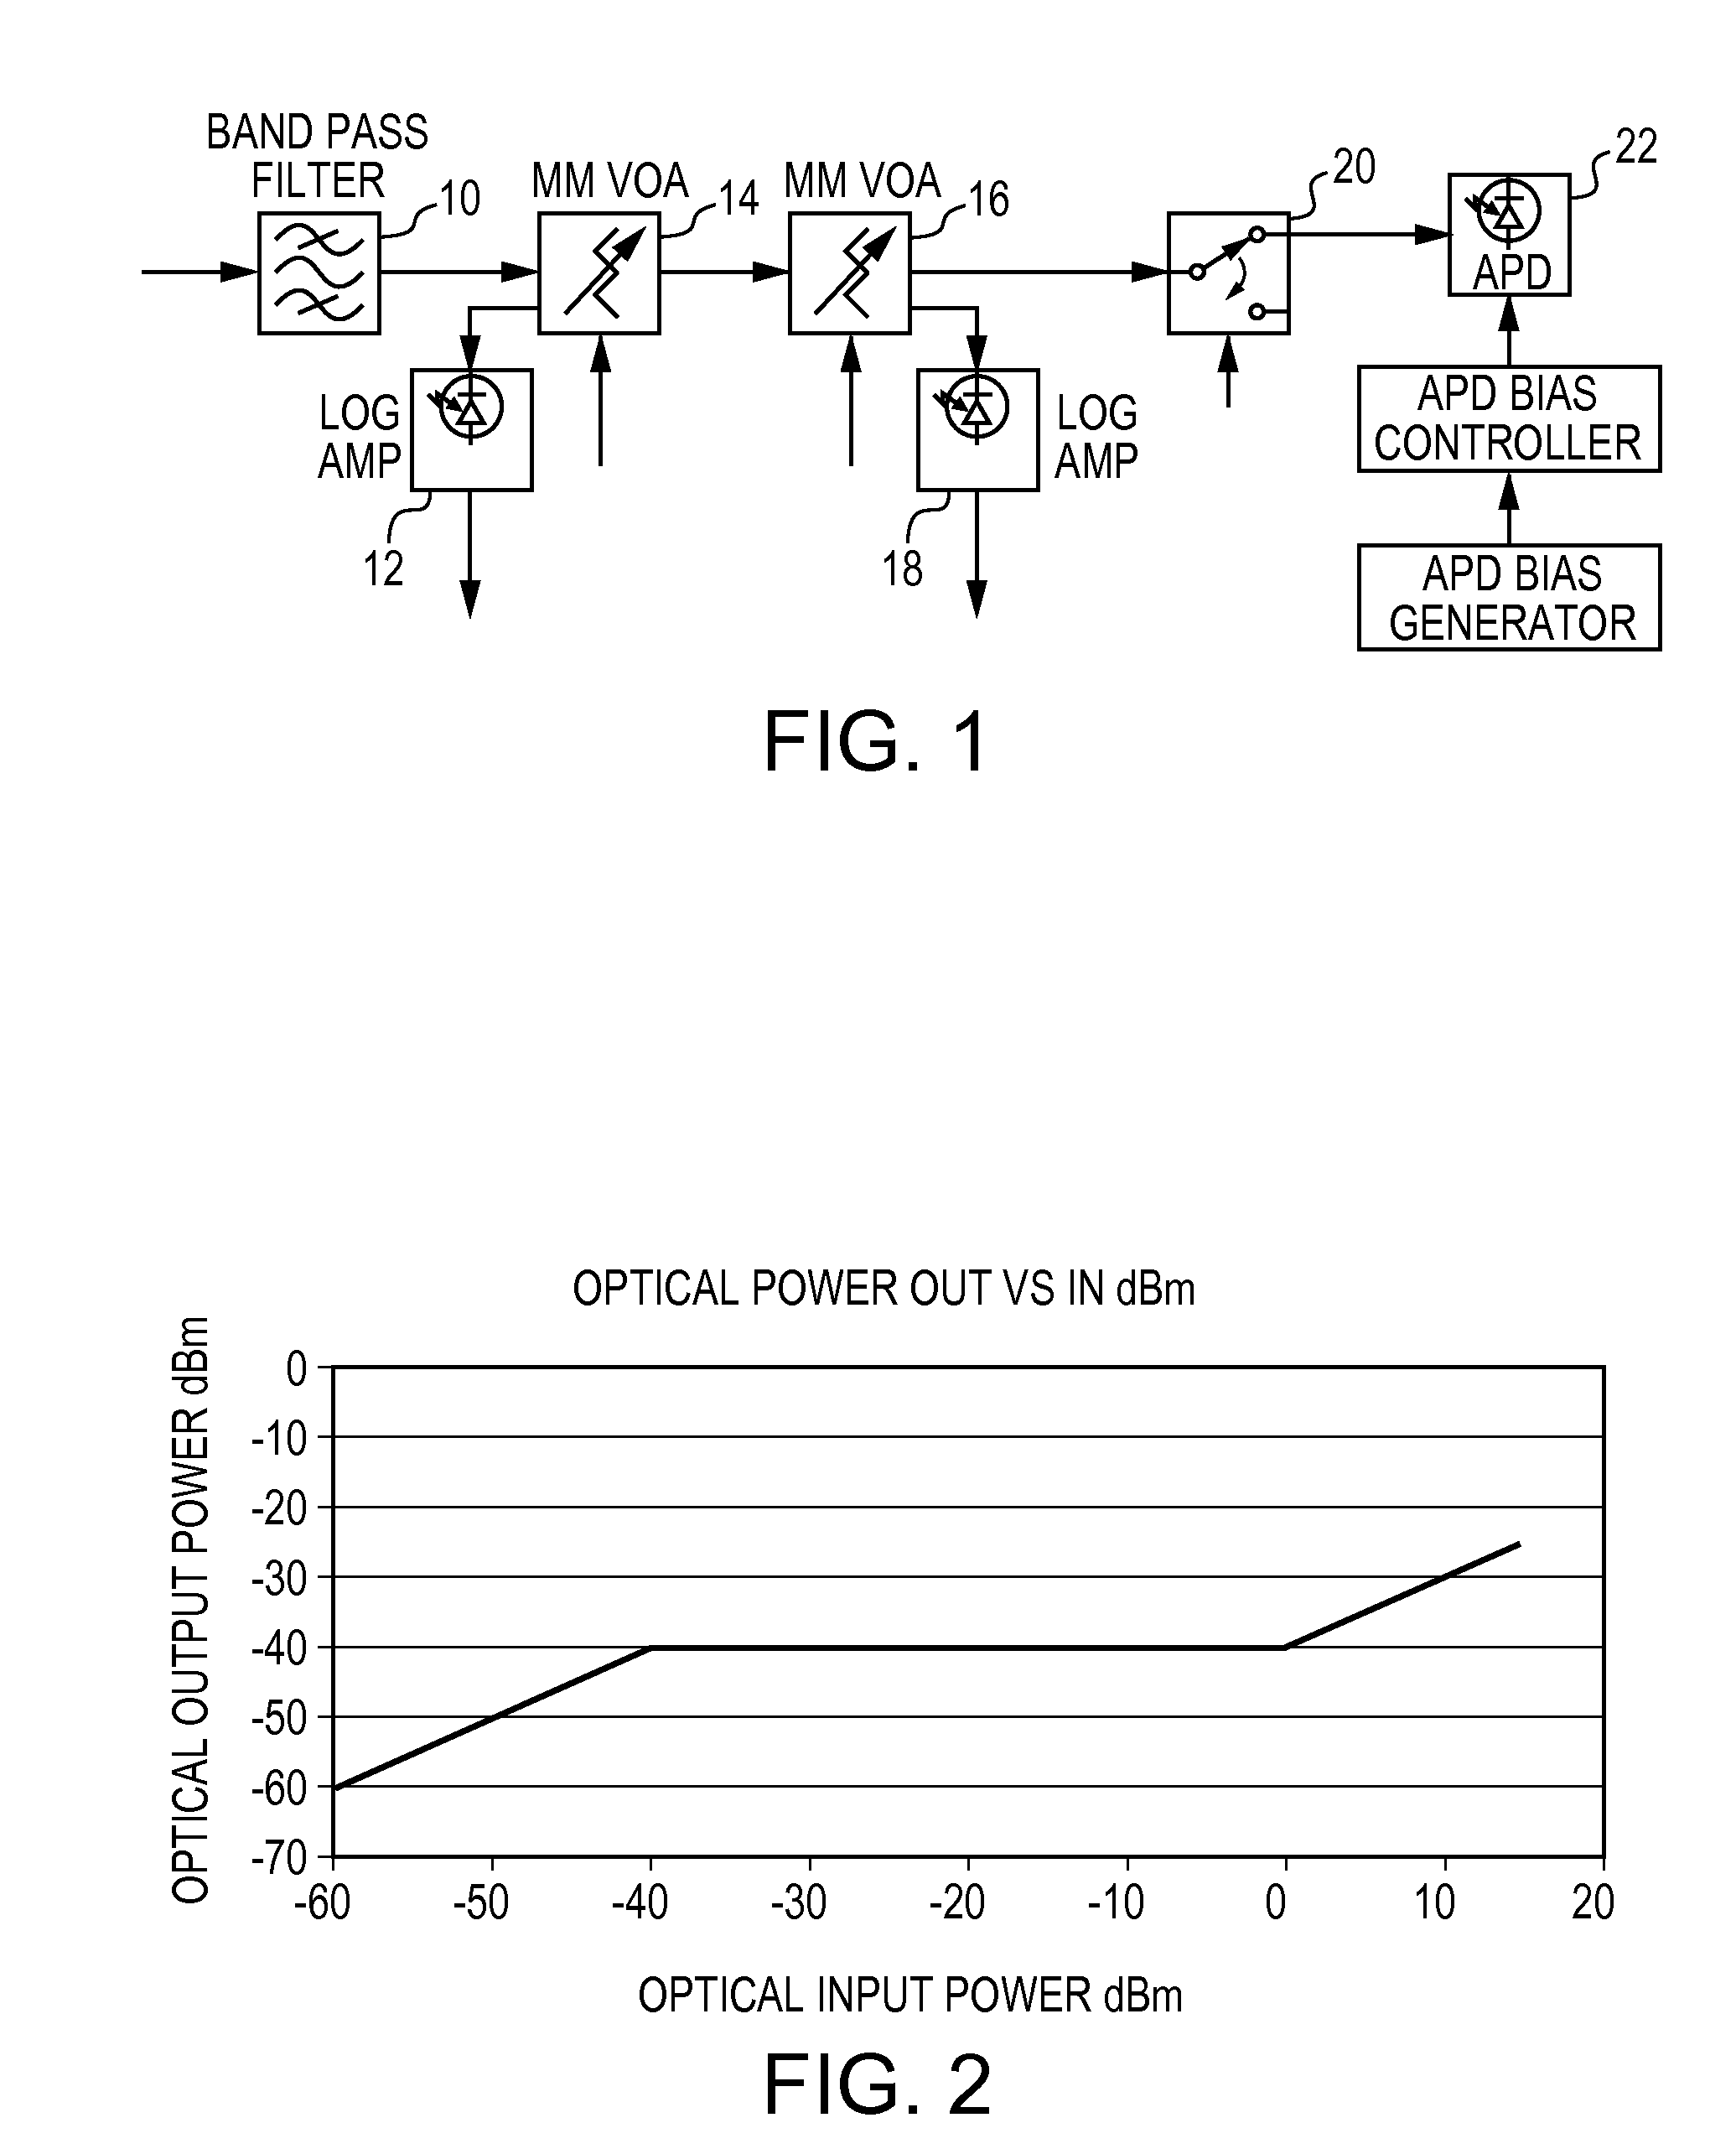 Apparatus and Method for Stabilizing Power to an Optical Multimode Receiver